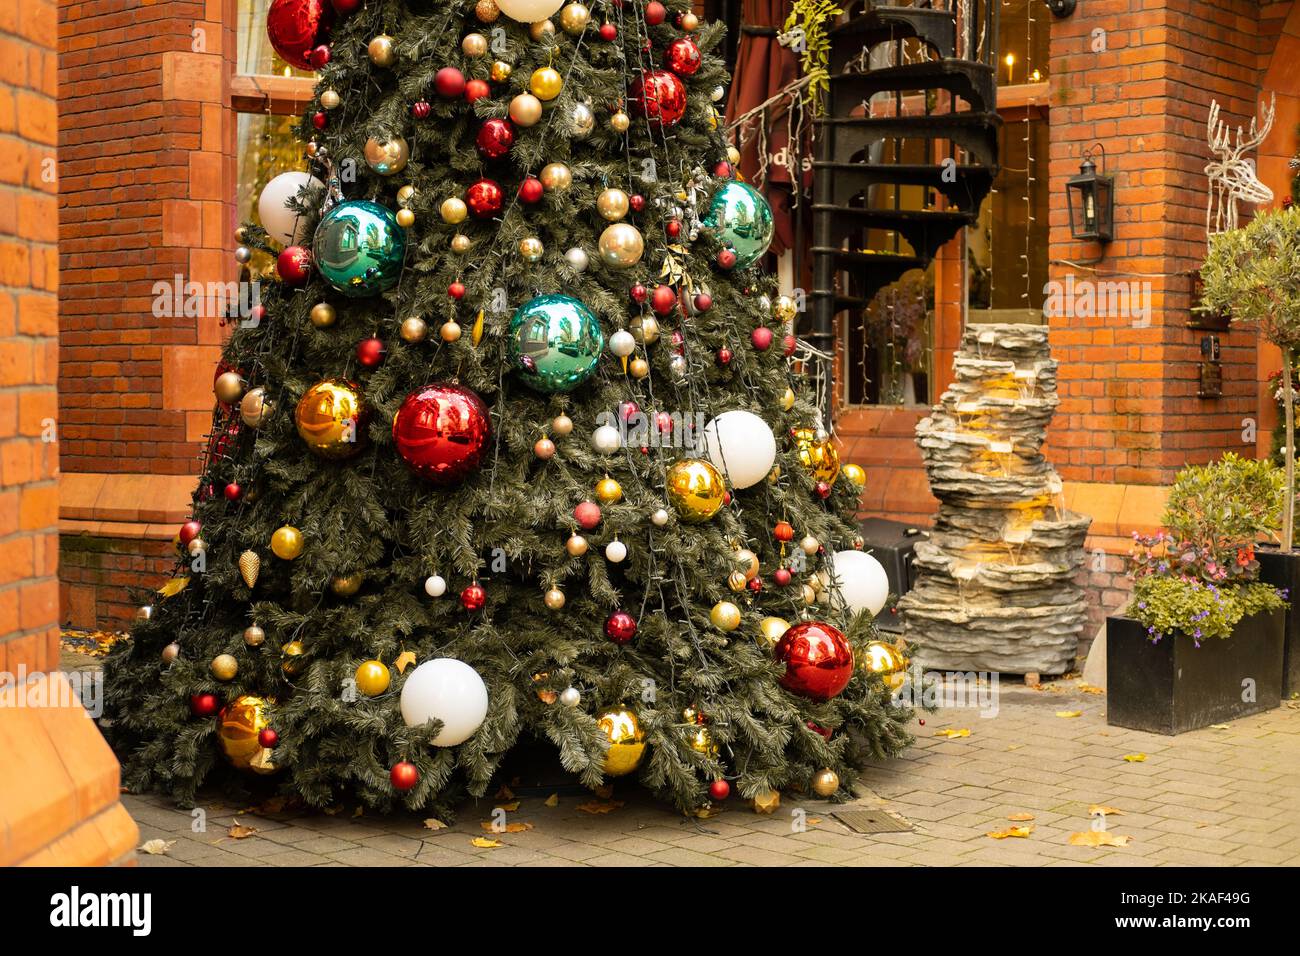 Partial view of a decorated Christmas tree and a fountain outdoors Stock Photo